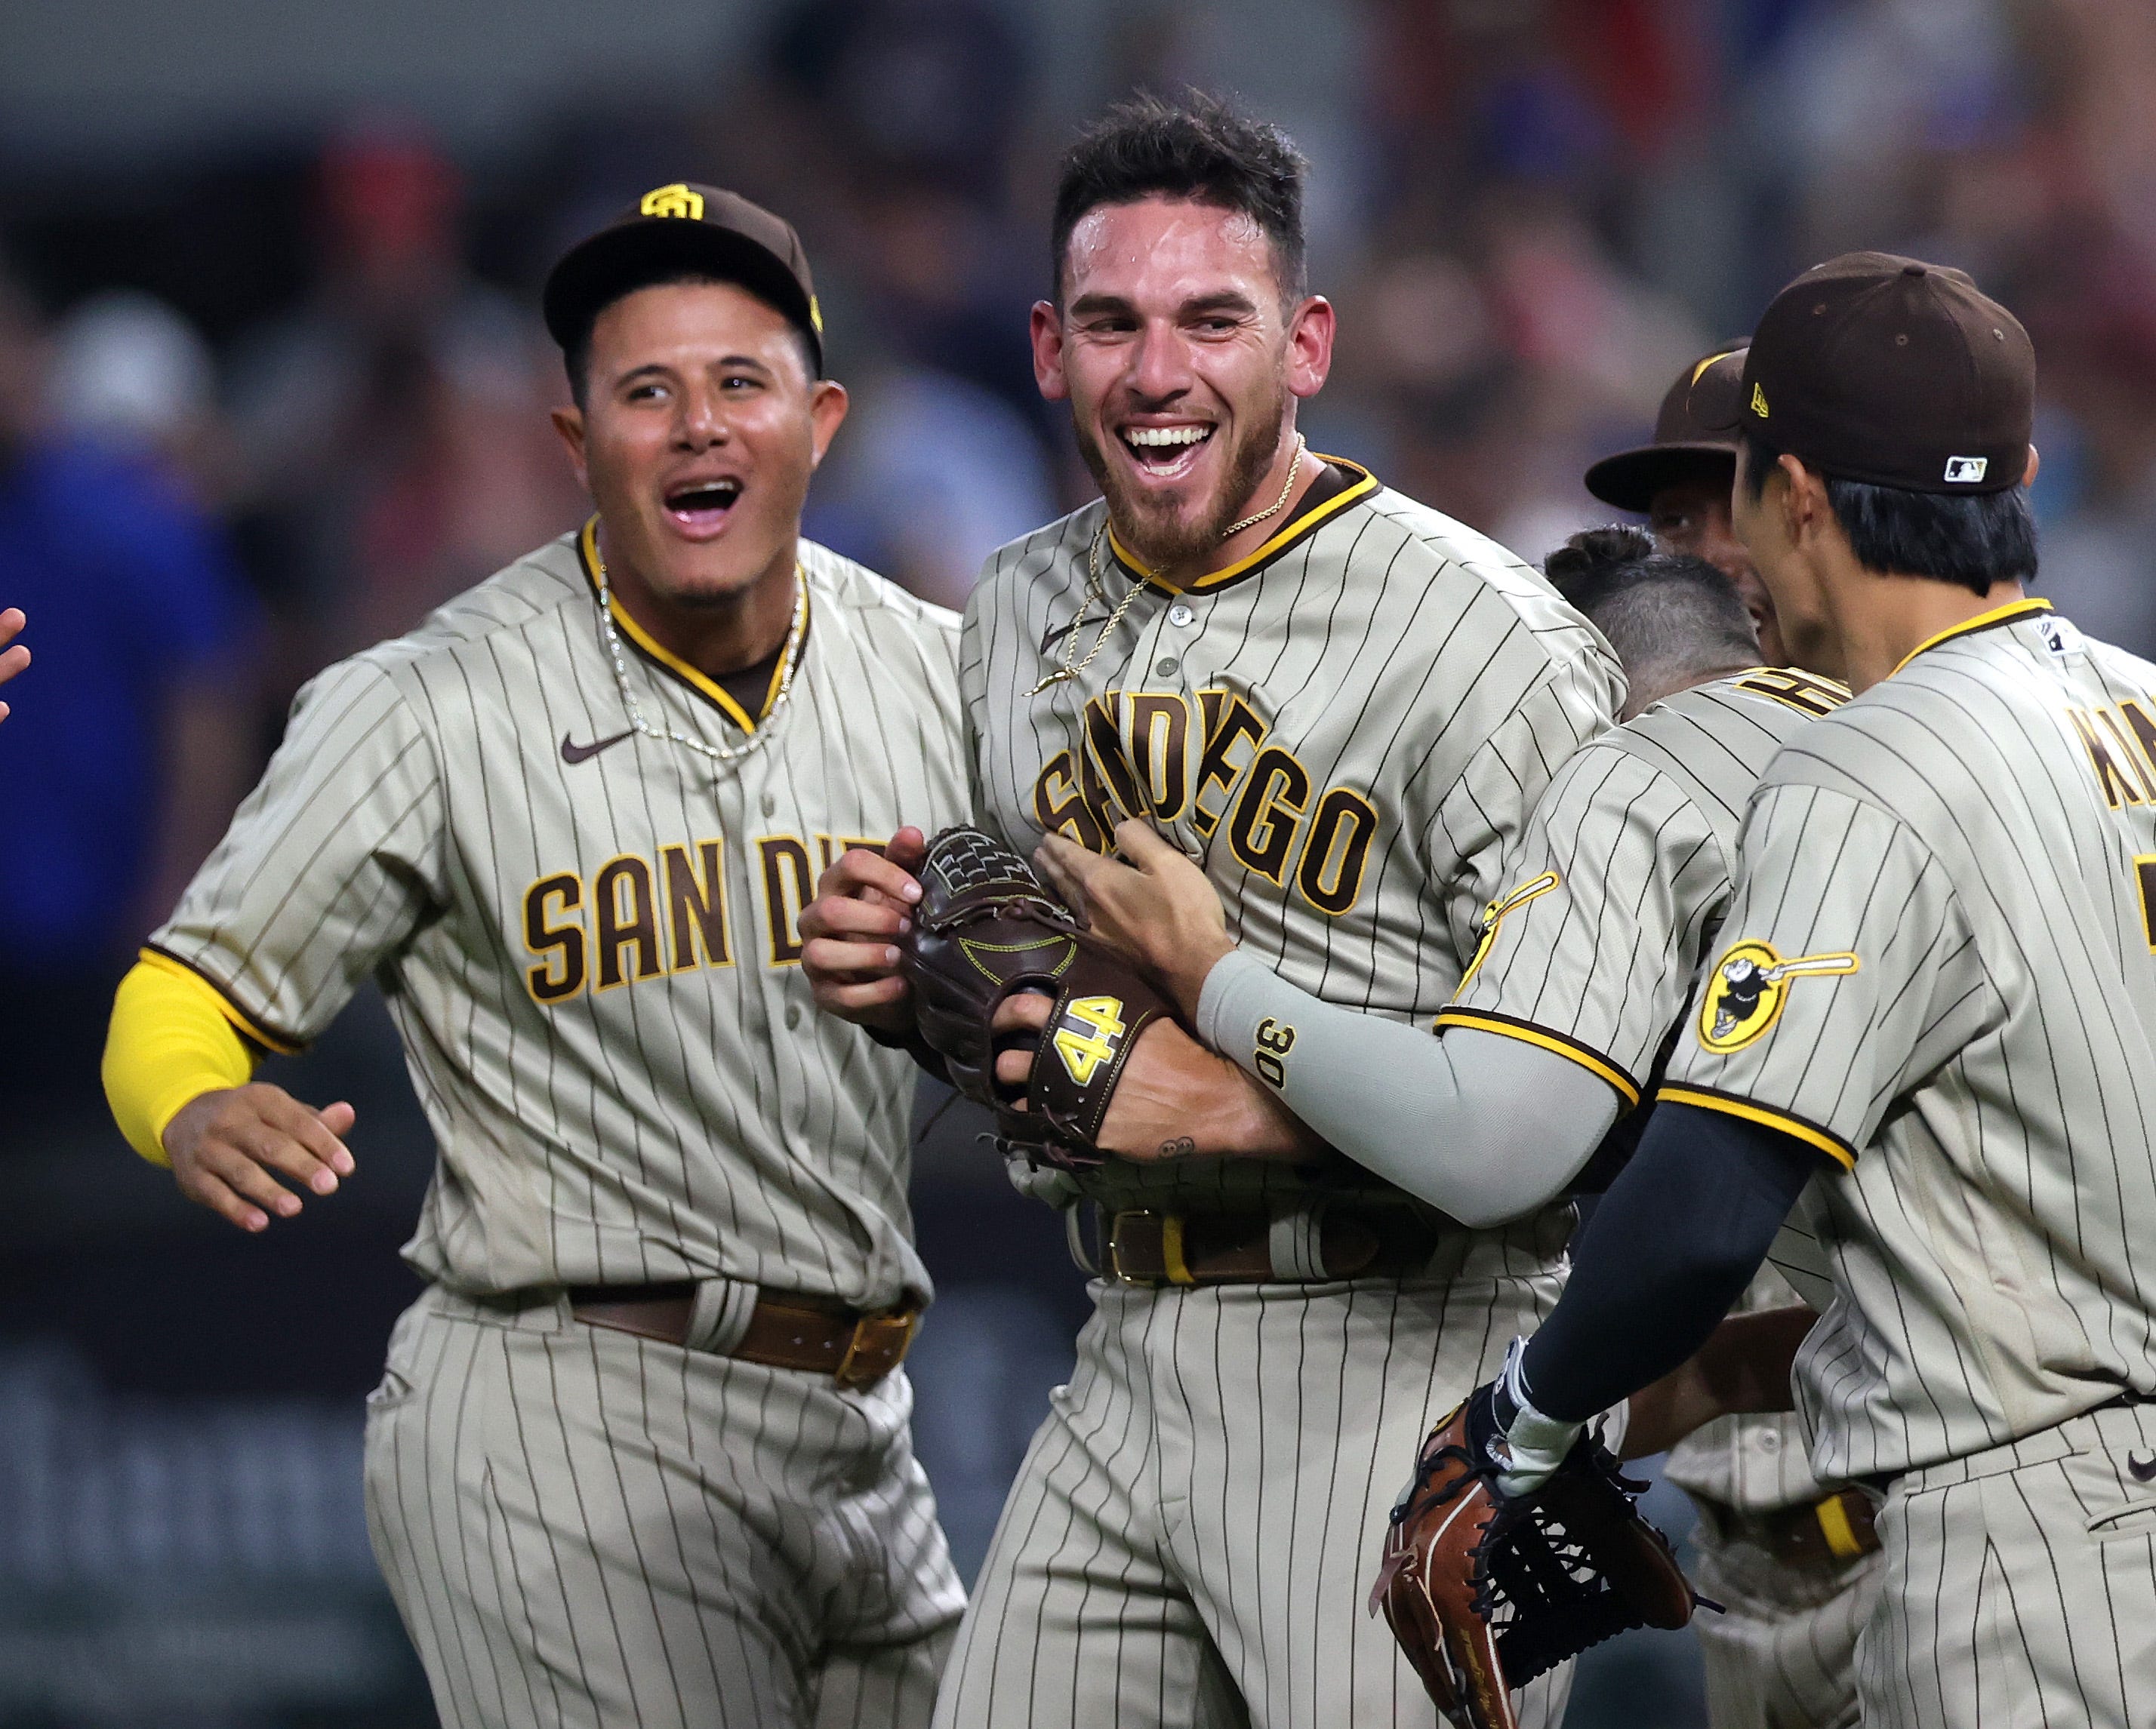 Padres pitcher Joe Musgrove gifted a lifetime supply of Ballast Point beer after tossing historic no-hitter